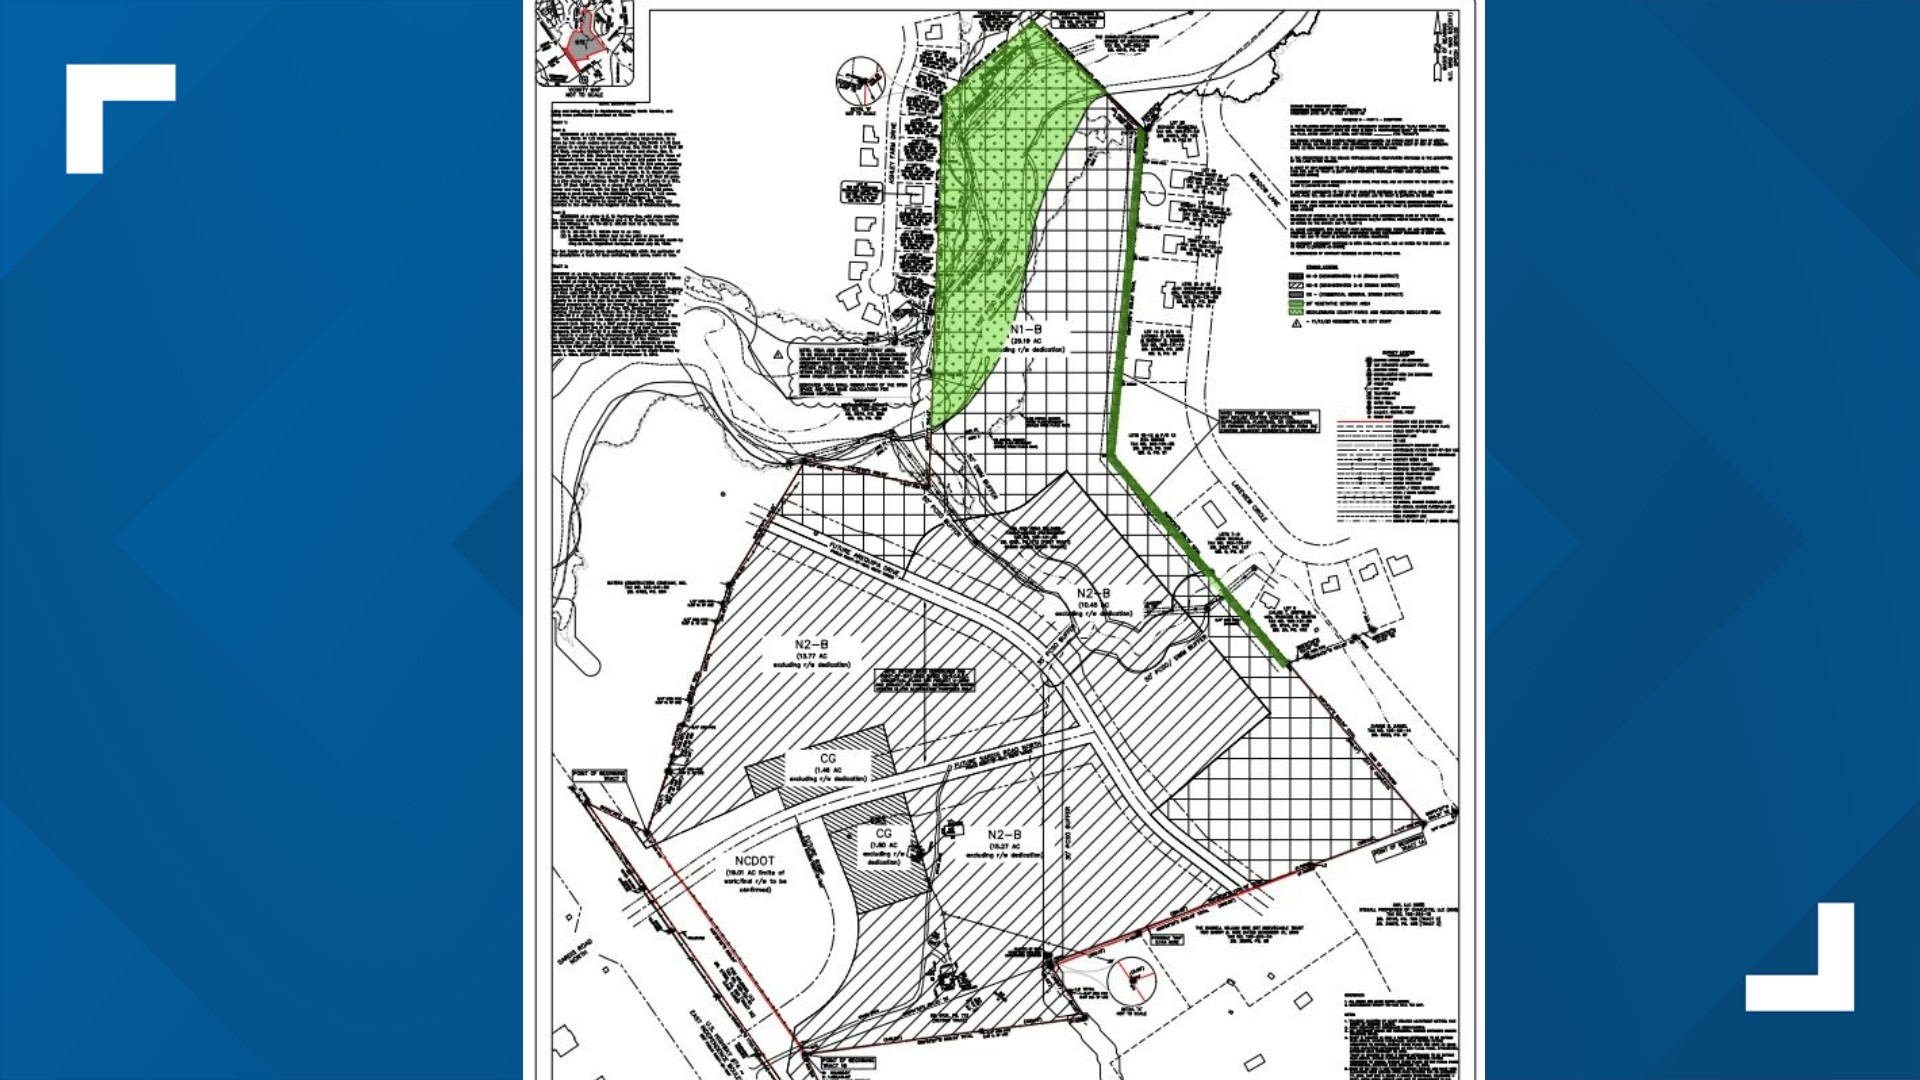 A developer wants to build houses, apartments, and businesses on land near Matthews, where NCDOT plans to extend roads.